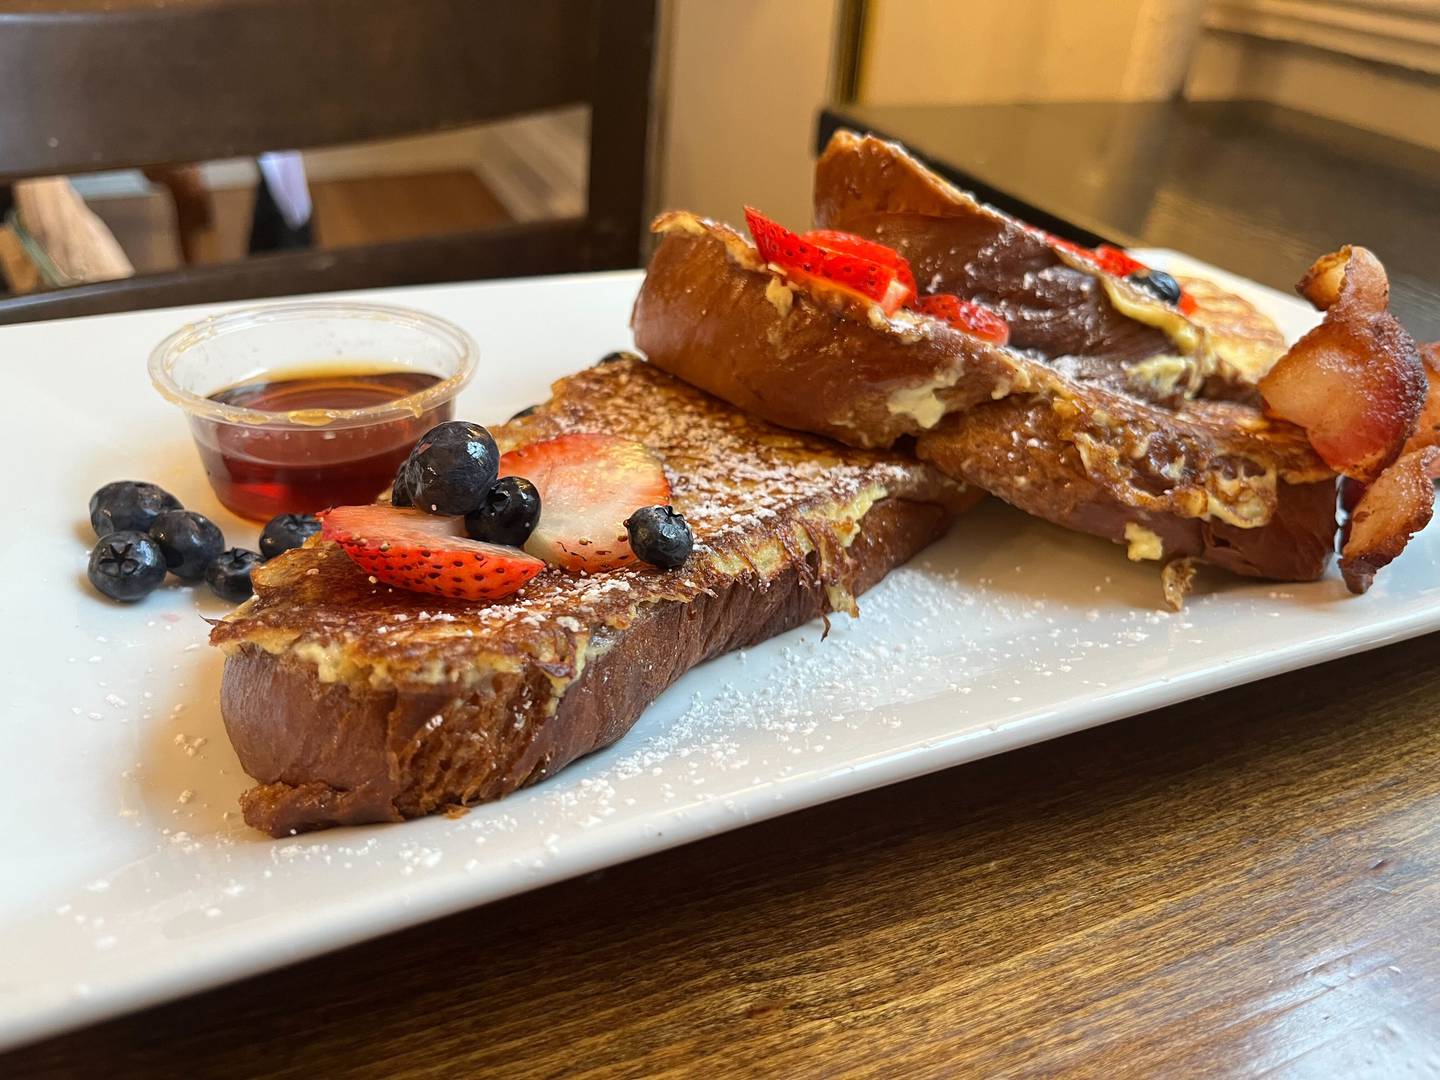 Farm Bell Kitchen in Charlottesville, Virginia serves brioche French toast with maple syrup and berries.